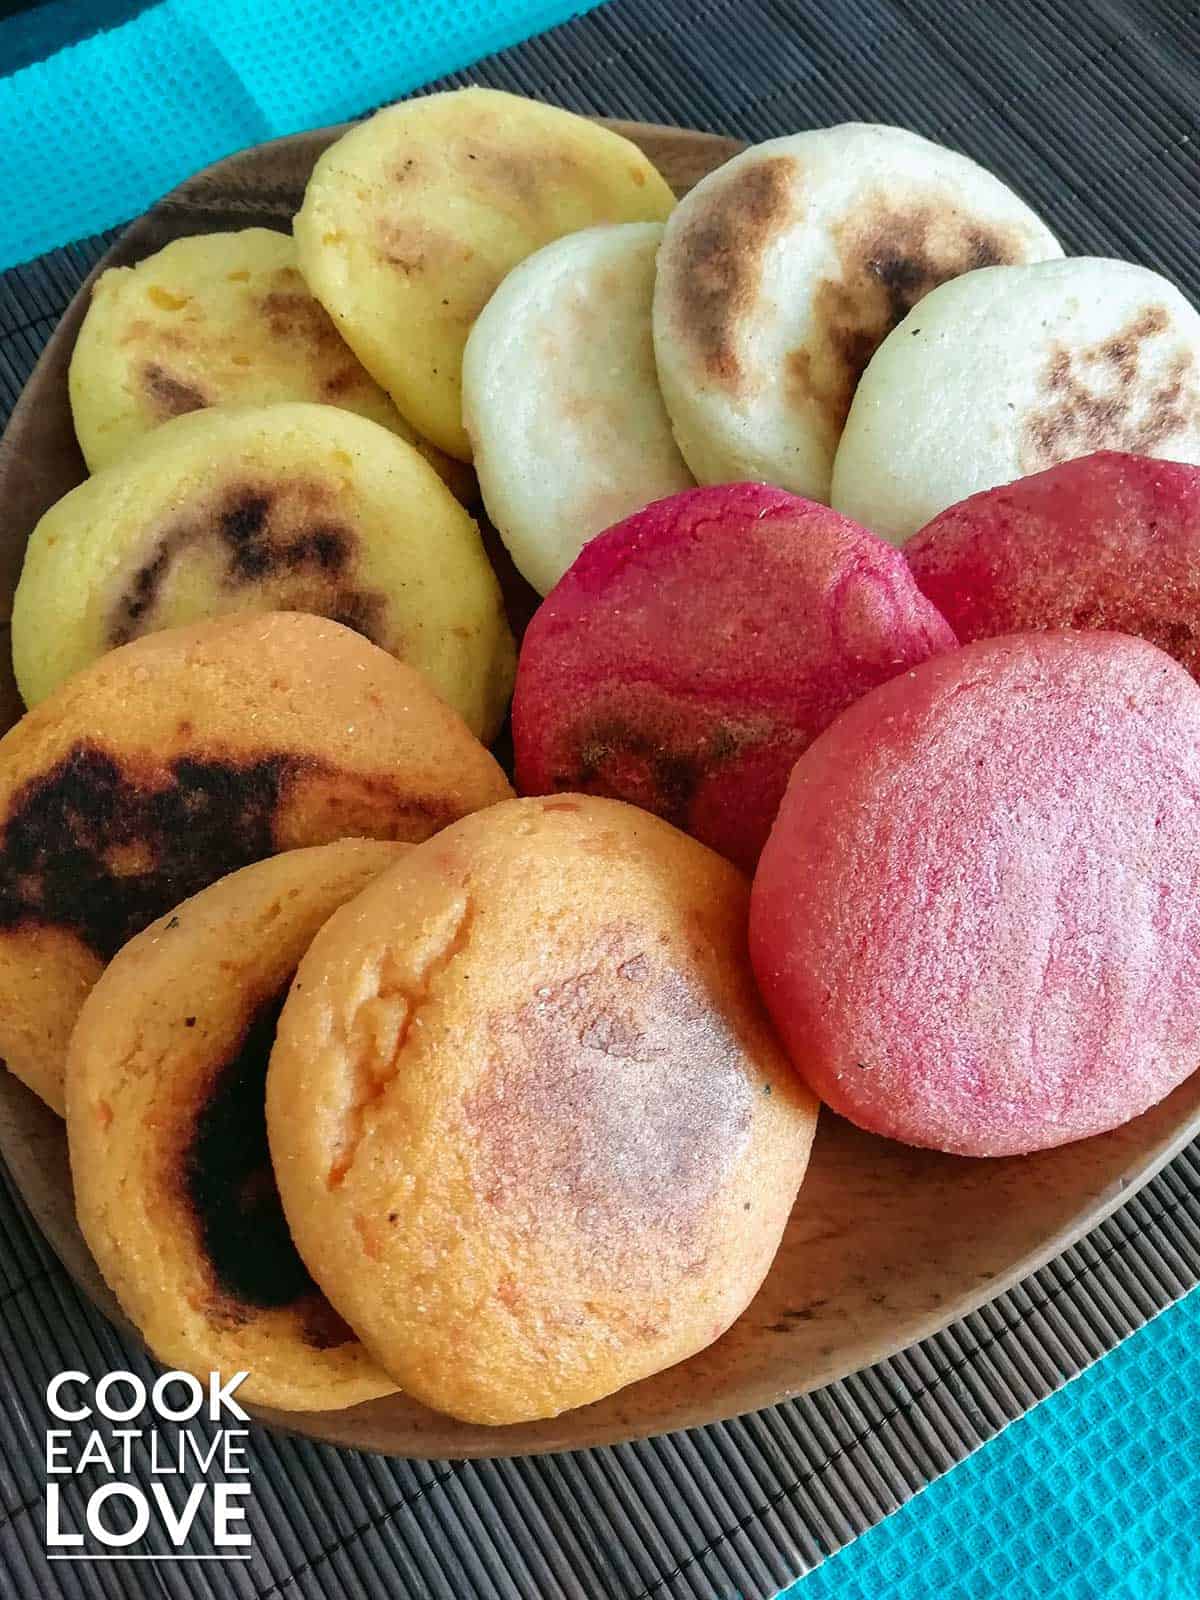 Colored Venezuelan arepas on a plate ready to eat